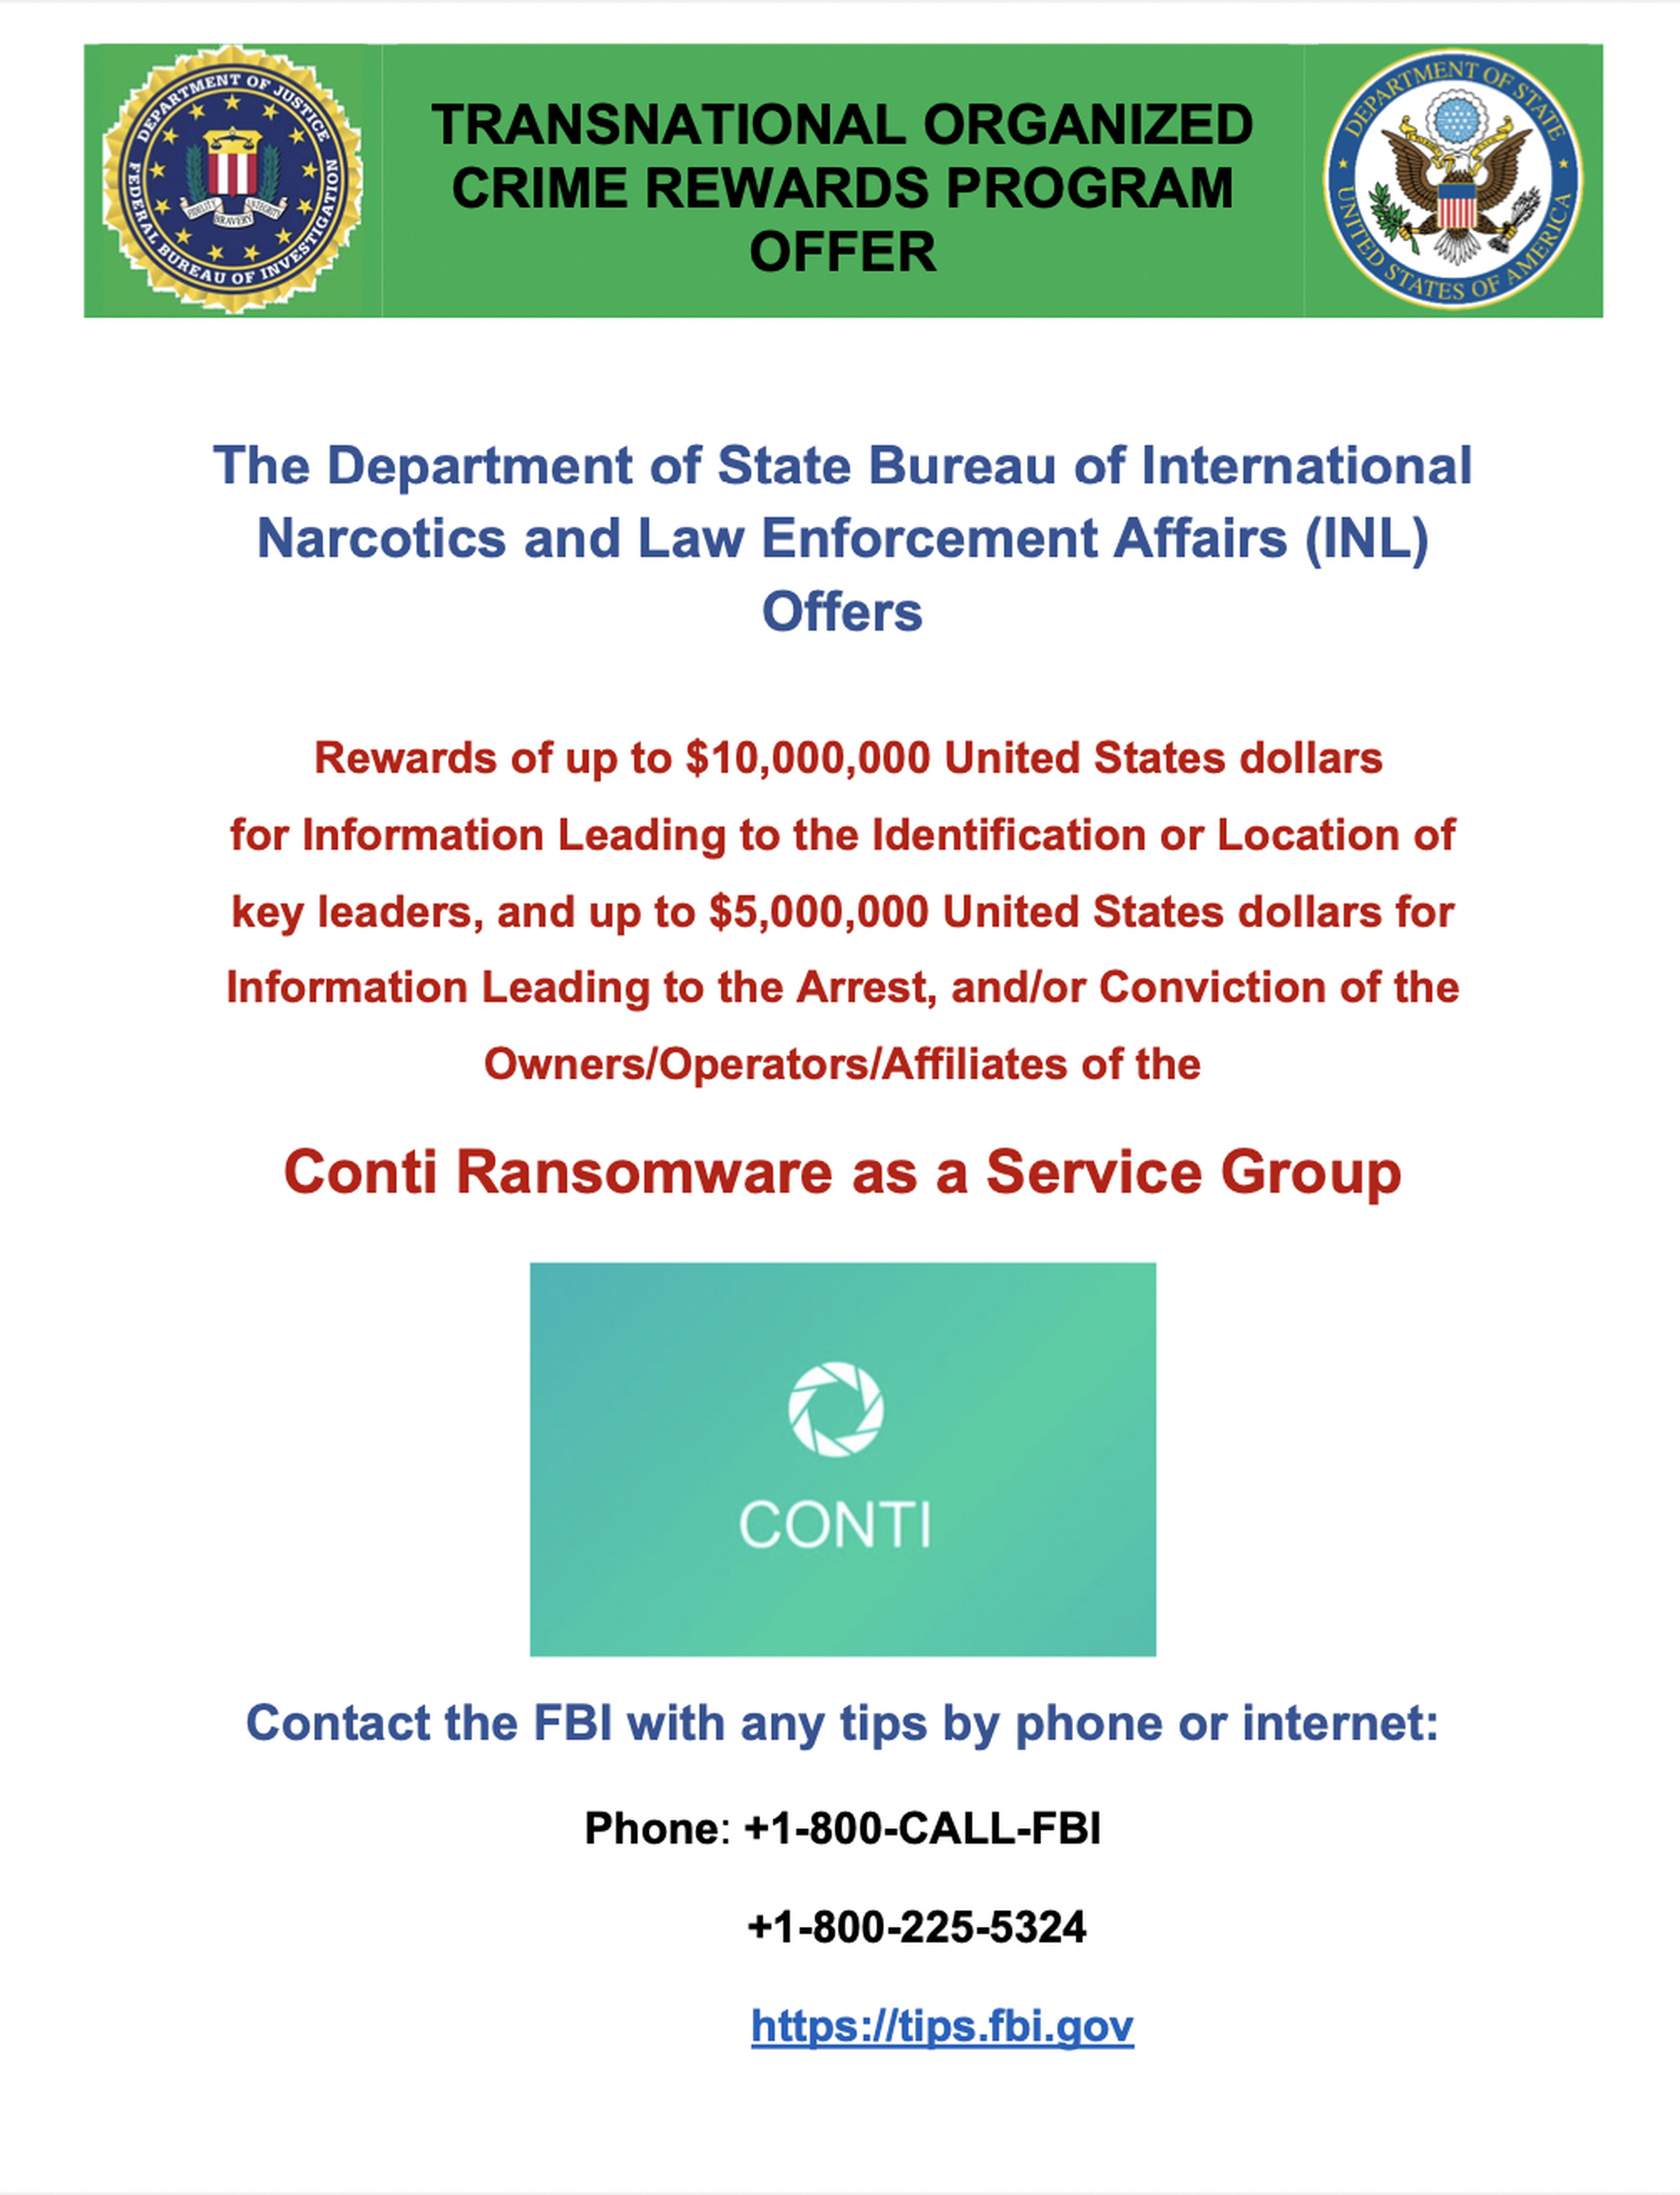 The Department of State Bureau of International Narcotics and Law Enforcement Affairs (INL) Offers  Rewards of up to $10,000,000 United States dollars for Information Leading to the Identification or Location of key leaders, and up to $5,000,000 United States dollars for Information Leading to the Arrest, and/or Conviction of the Owners/Operators/A...  Conti Ransomware as a Service Group  Contact the FBI with any tips by phone or internet: Phone: +1-800-CALL-FBI +1-800-225-5324&nbsp;